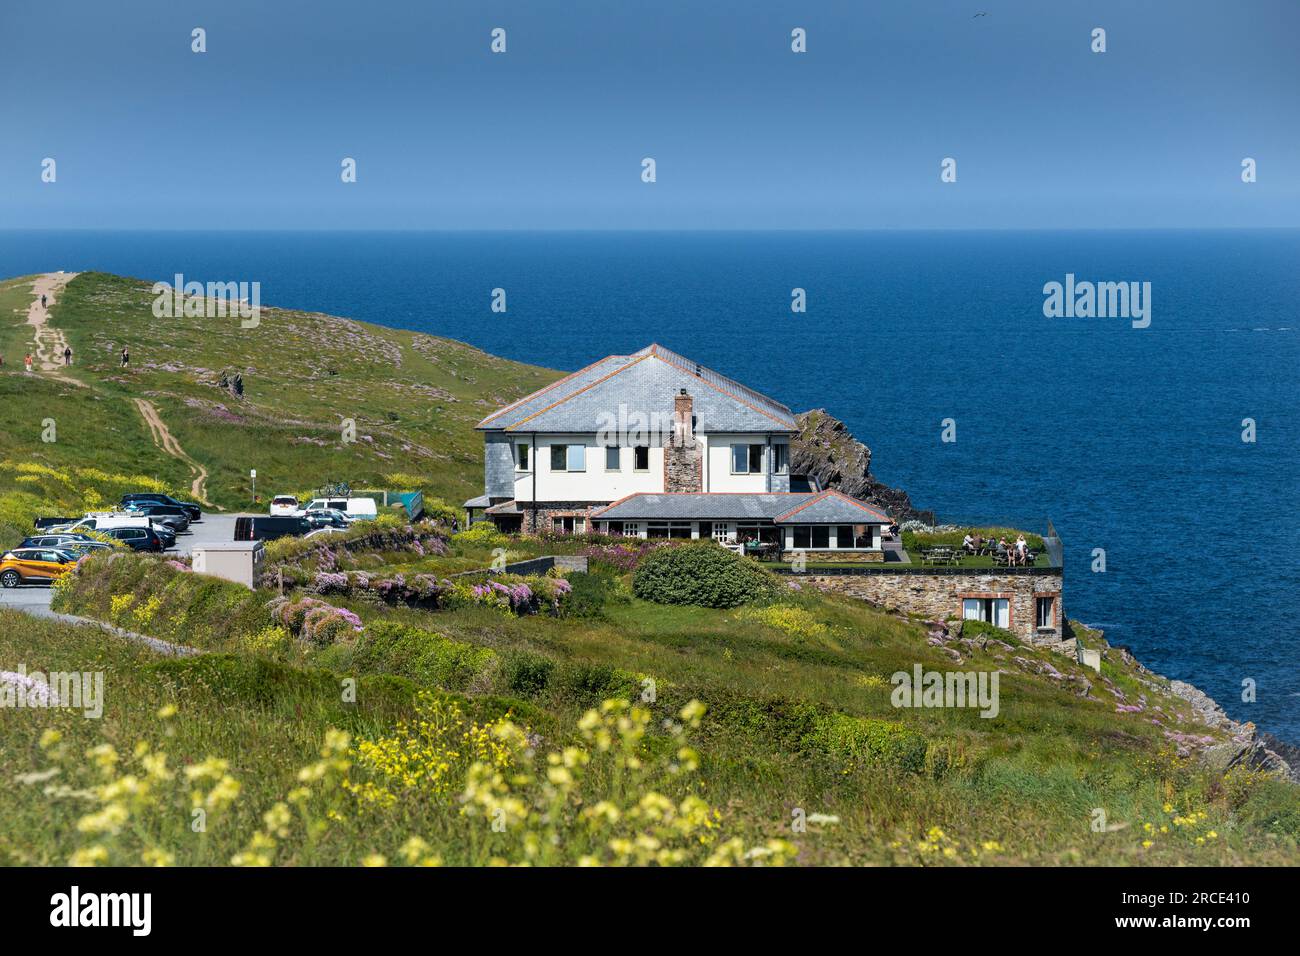 Lewinnick Lodge Boutique Hotel on Pentire Point East overlooking Fistral Bay in Newquay in Cornwall in the UK, Europe Stock Photo